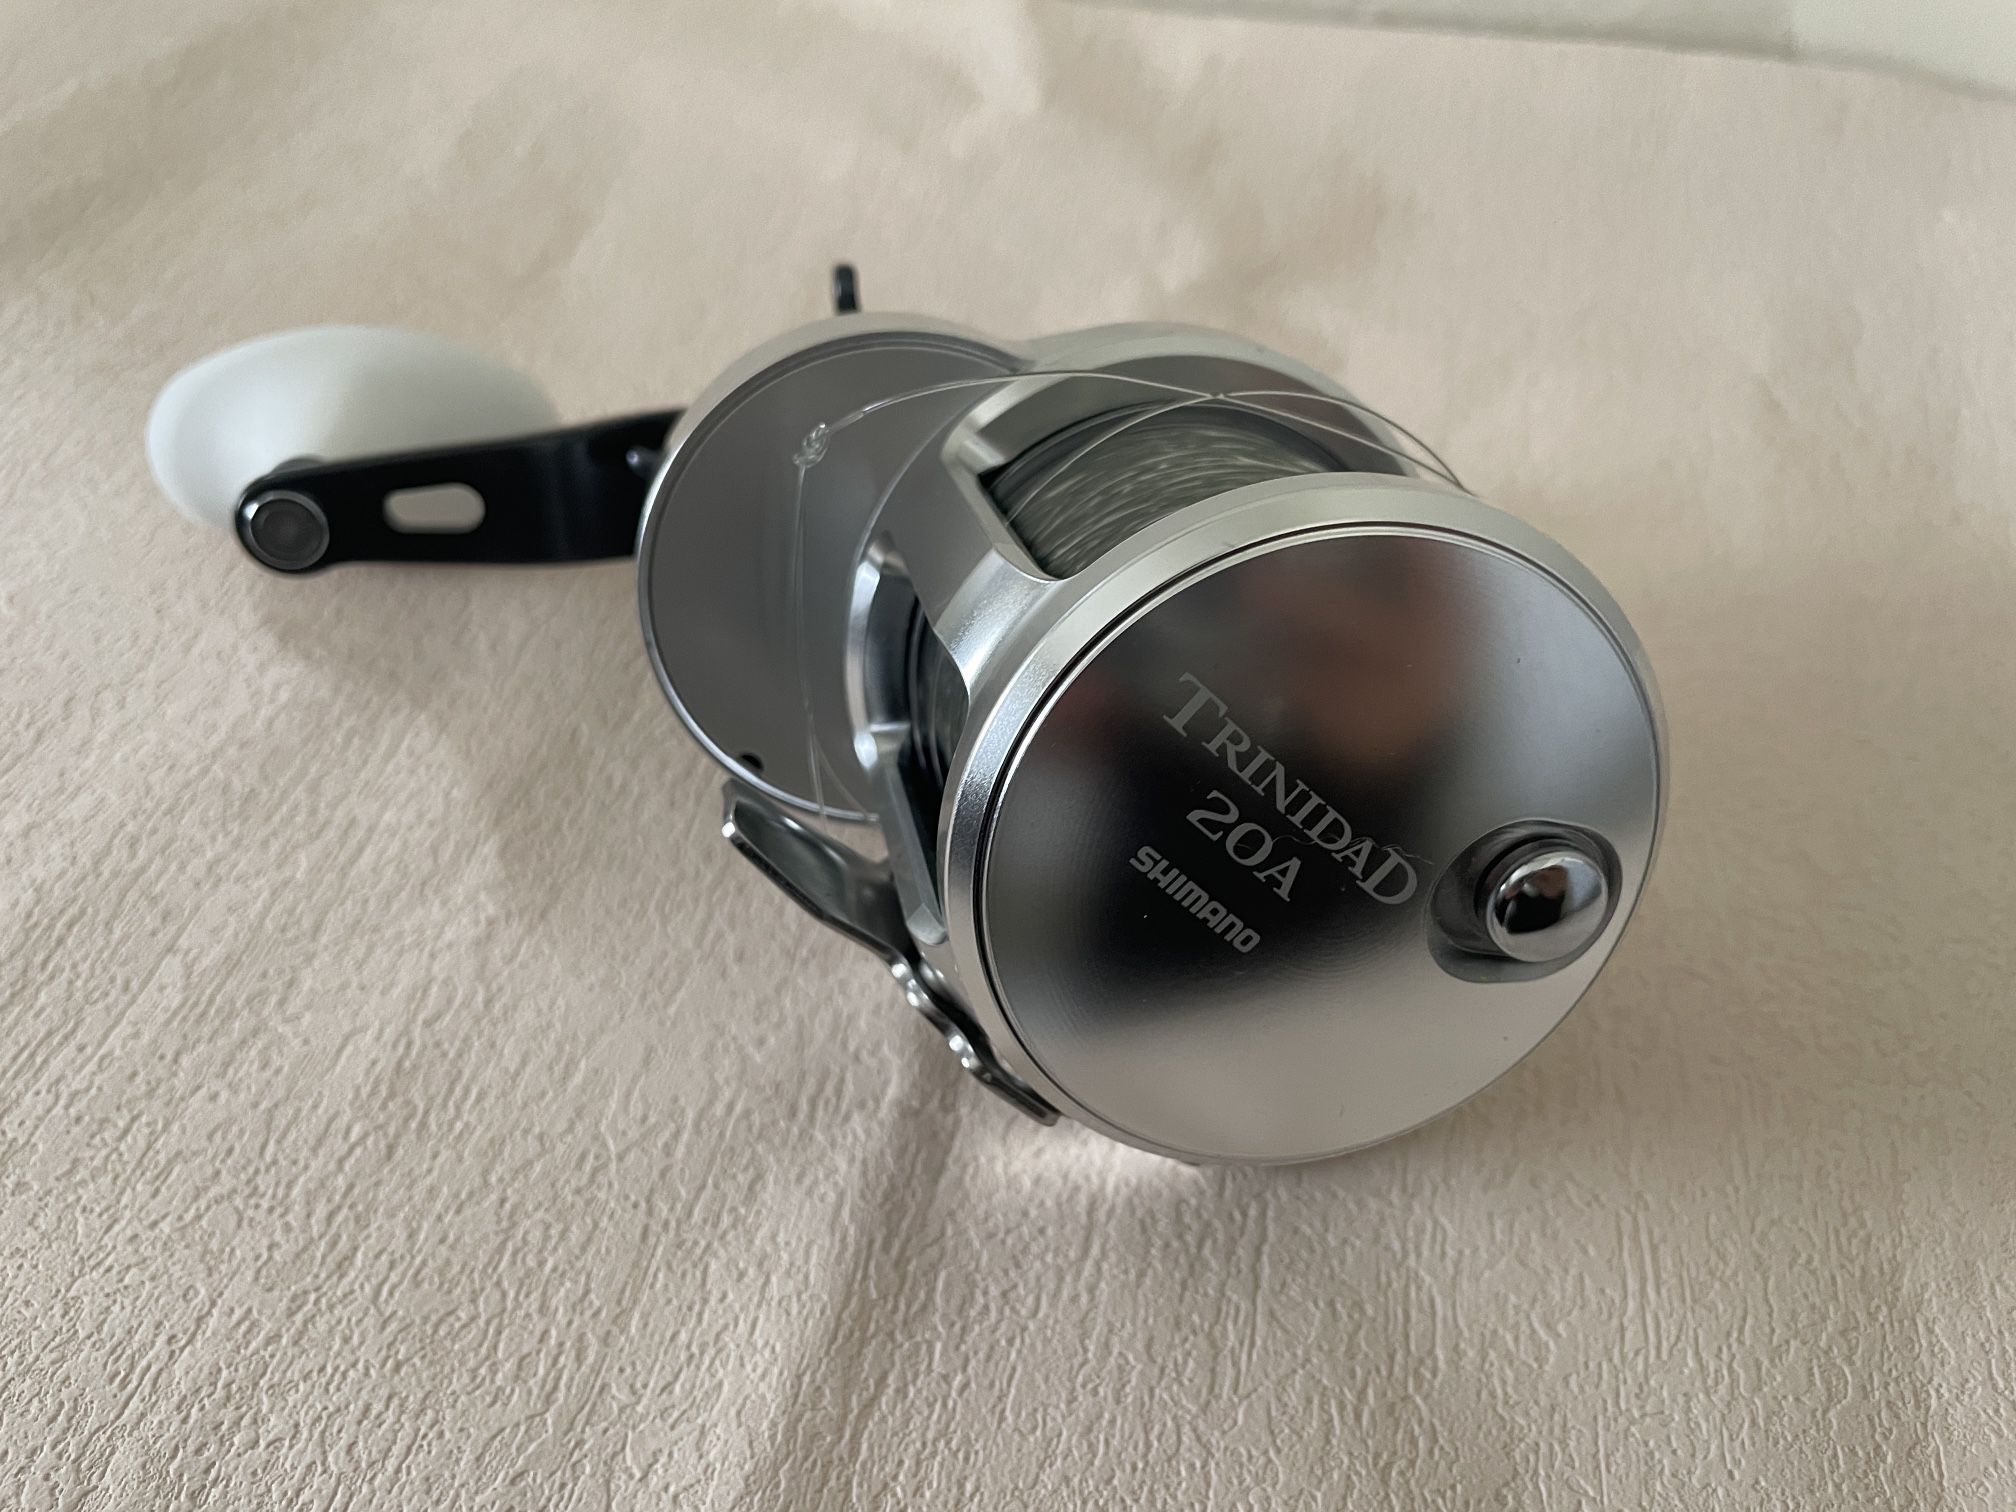 Shimano Trinidad 20A Conventional Fishing Reel for Sale in